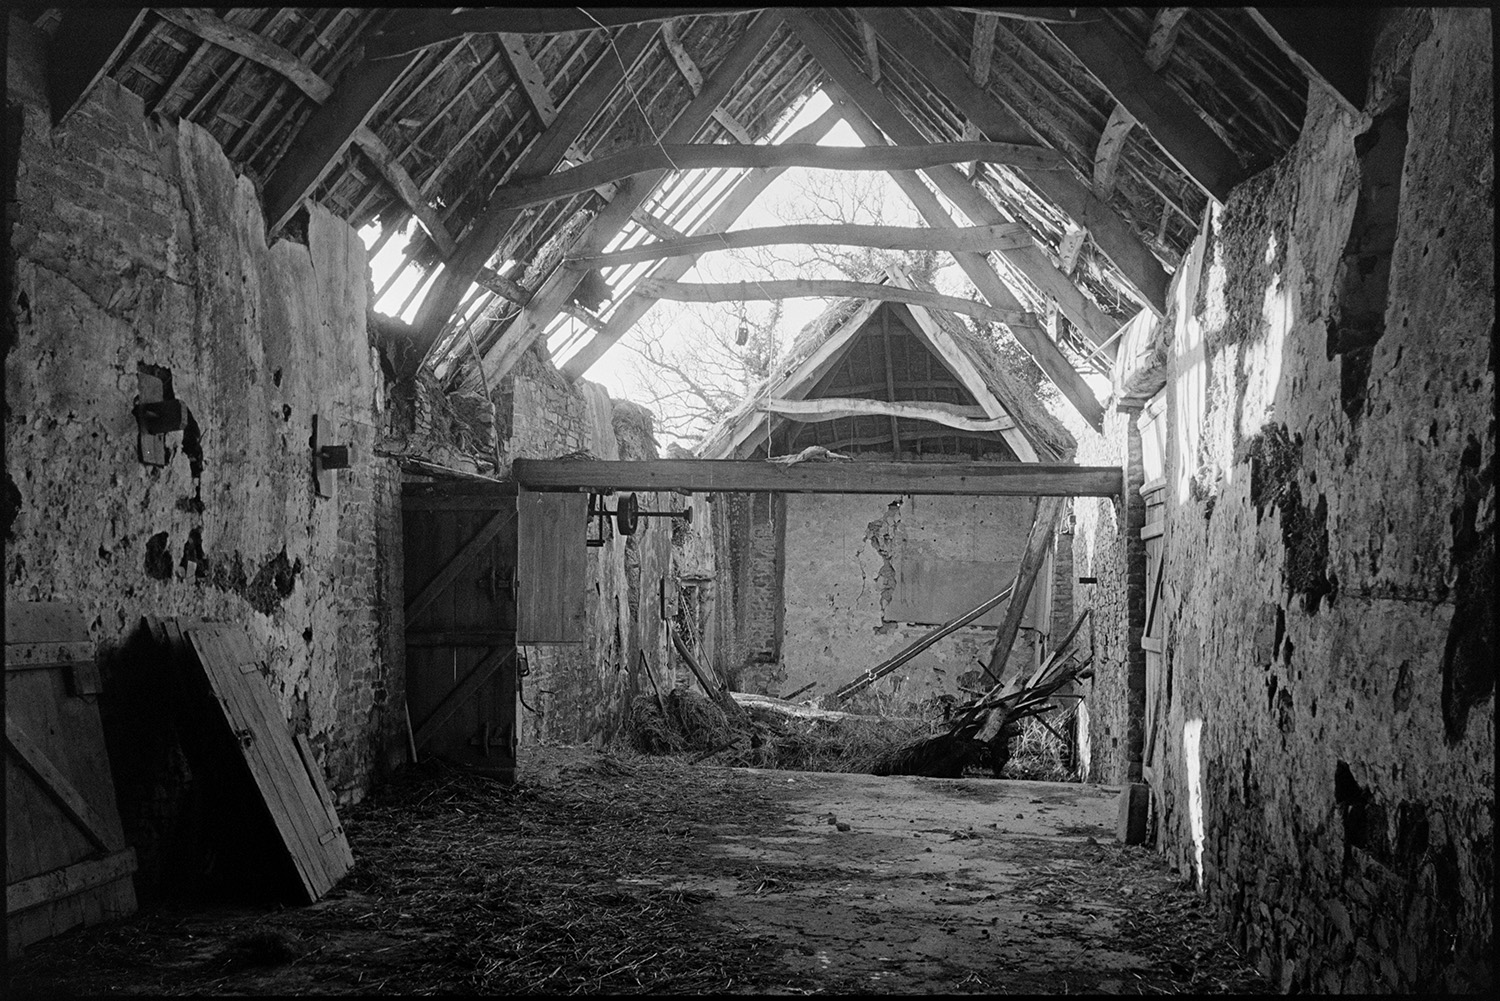 Collapsed cob and thatch barn, fallen oak beams. Now restored by new owners.
[Interior of a cob and thatch barn with a collapsed roof exposing oak beams, at Colleton Manor, Chulmleigh. The barn was later rebuilt.]